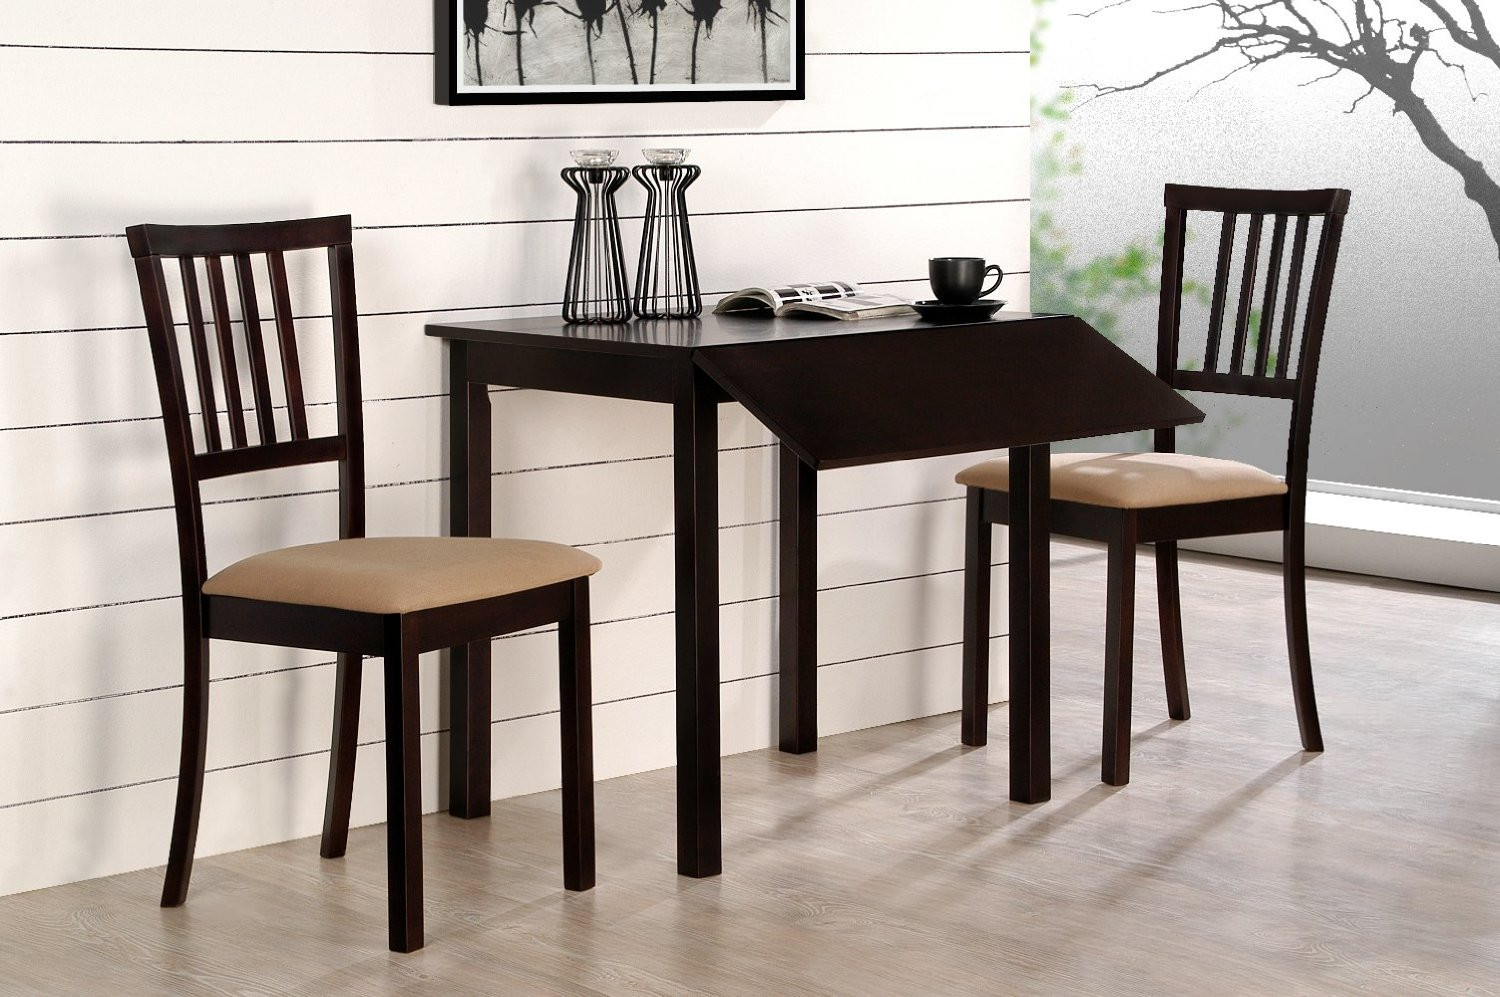 Small Kitchen Tables With Bench
 pact Dining Space Arrangement with Drop Leaf Dining